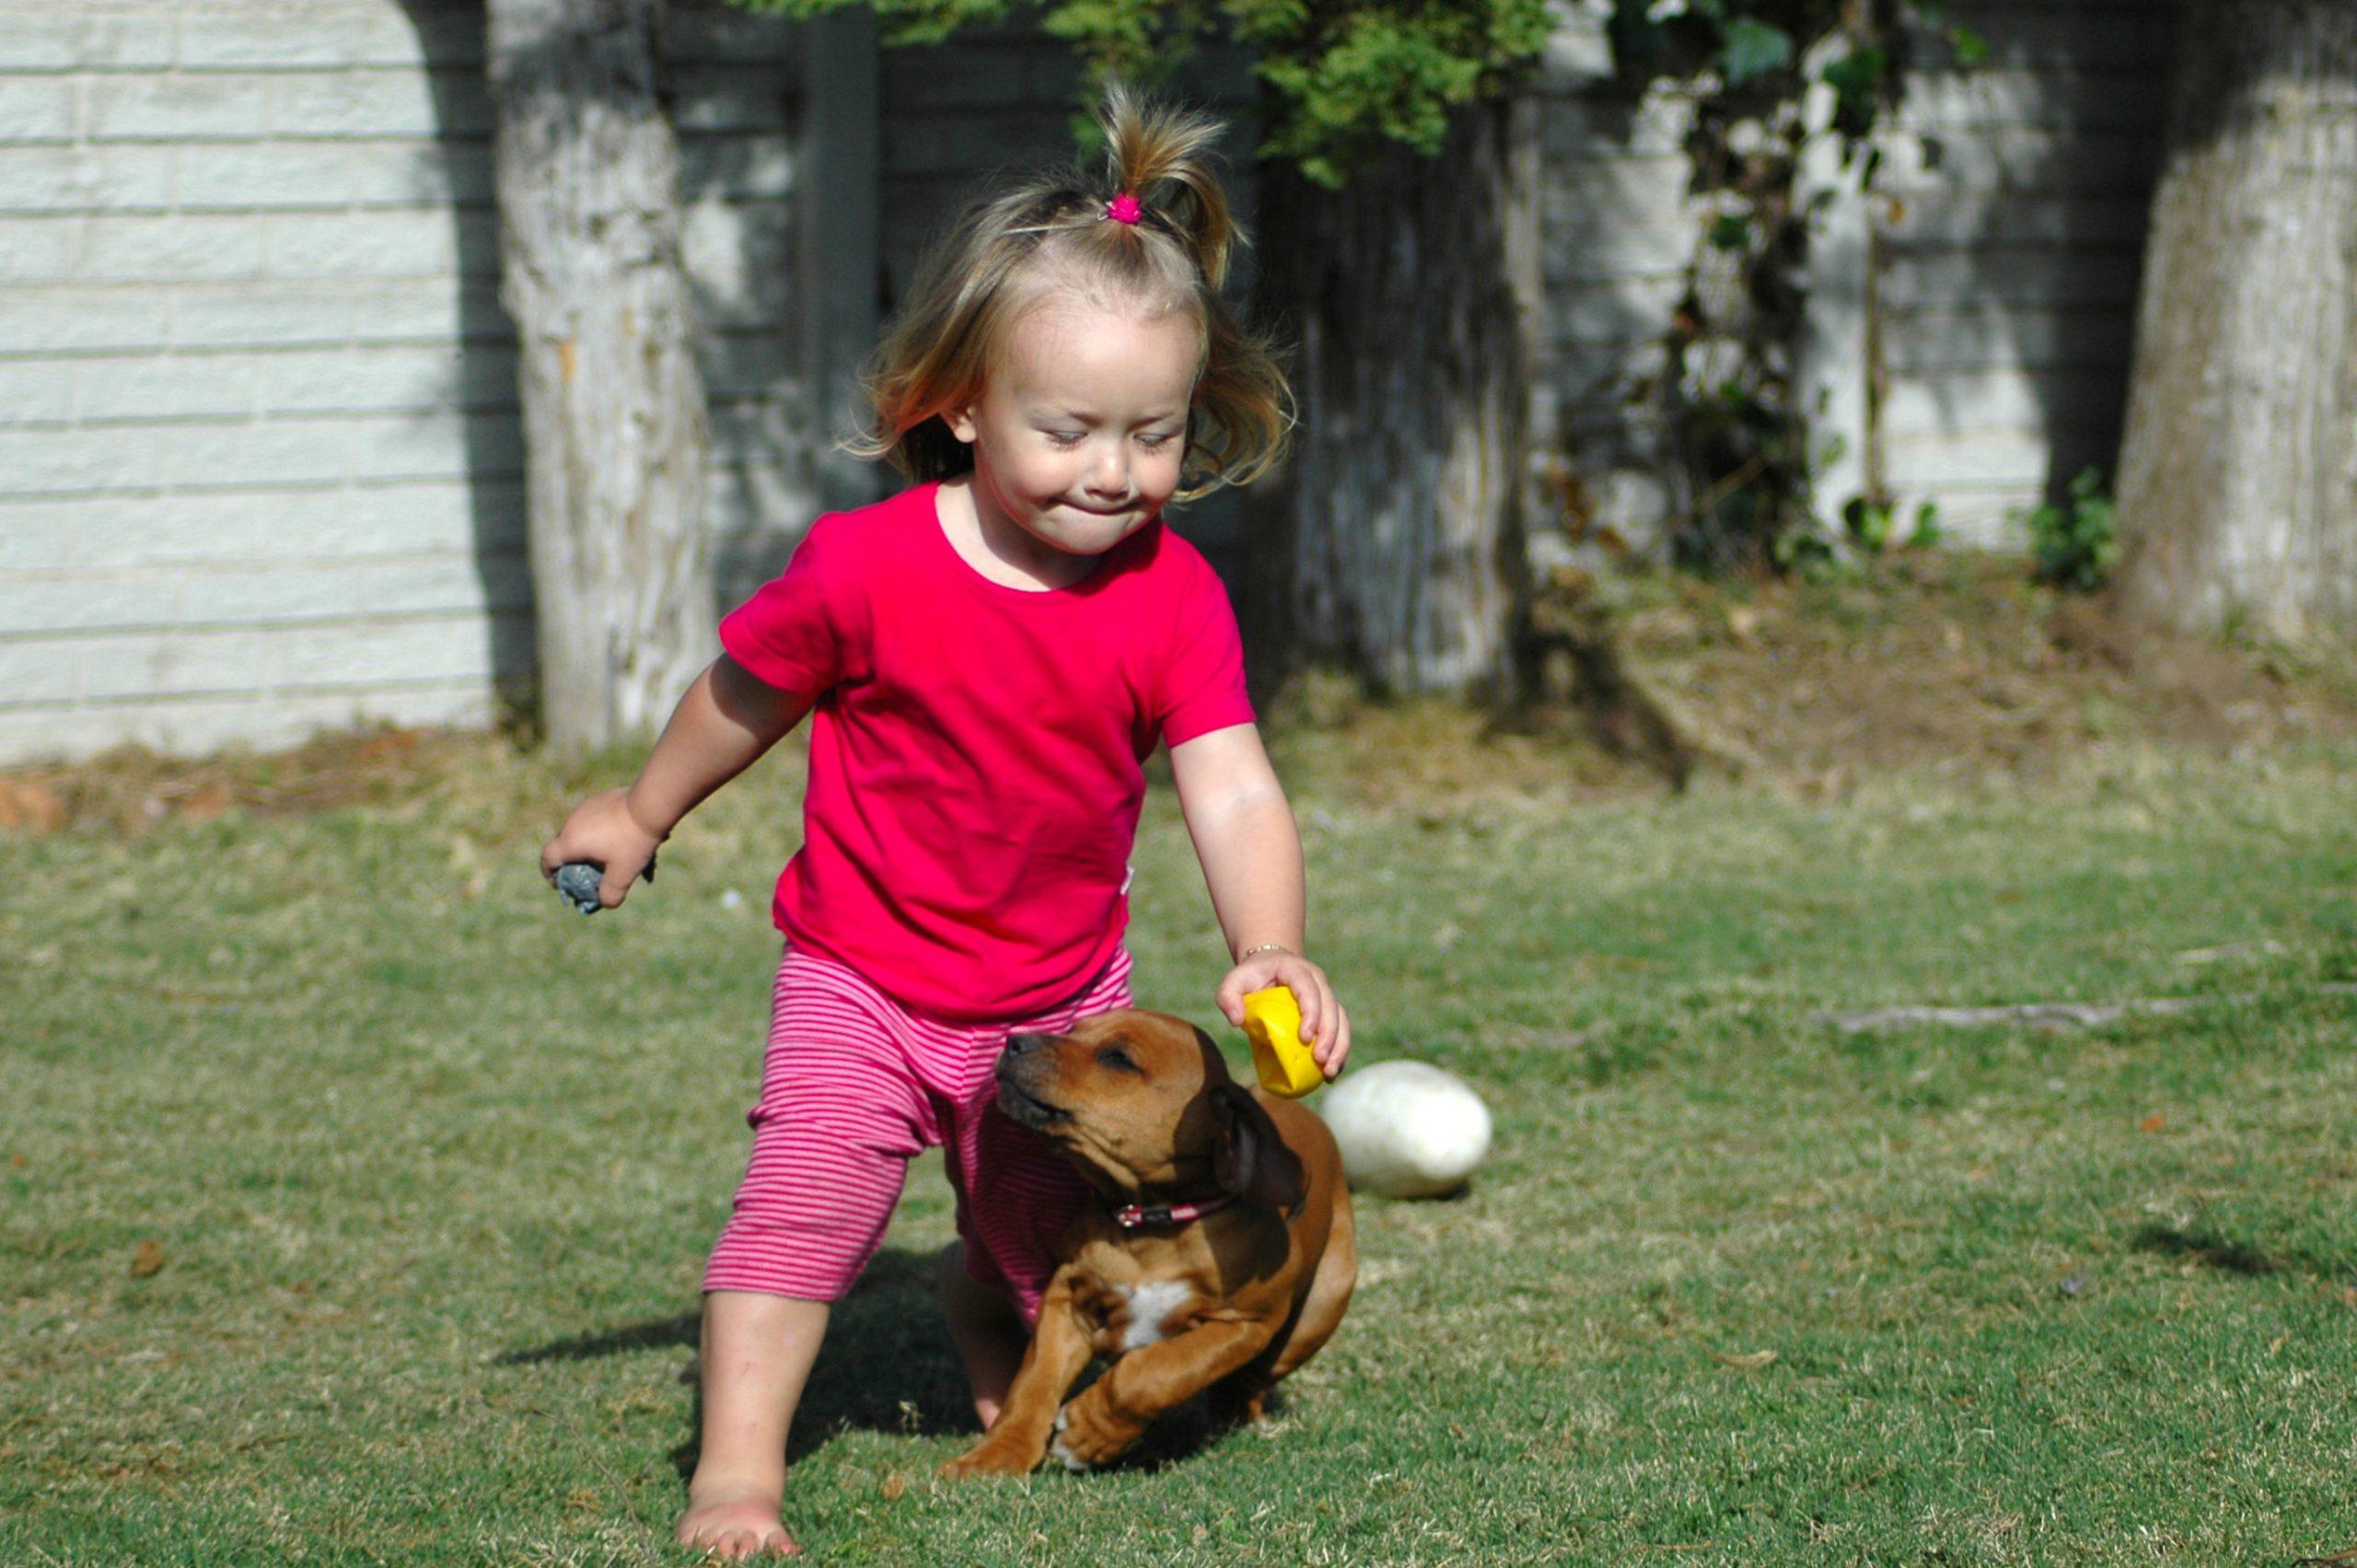 Keeping your children and pets safe when treating your lawn with weed killer - pet safe weed killers